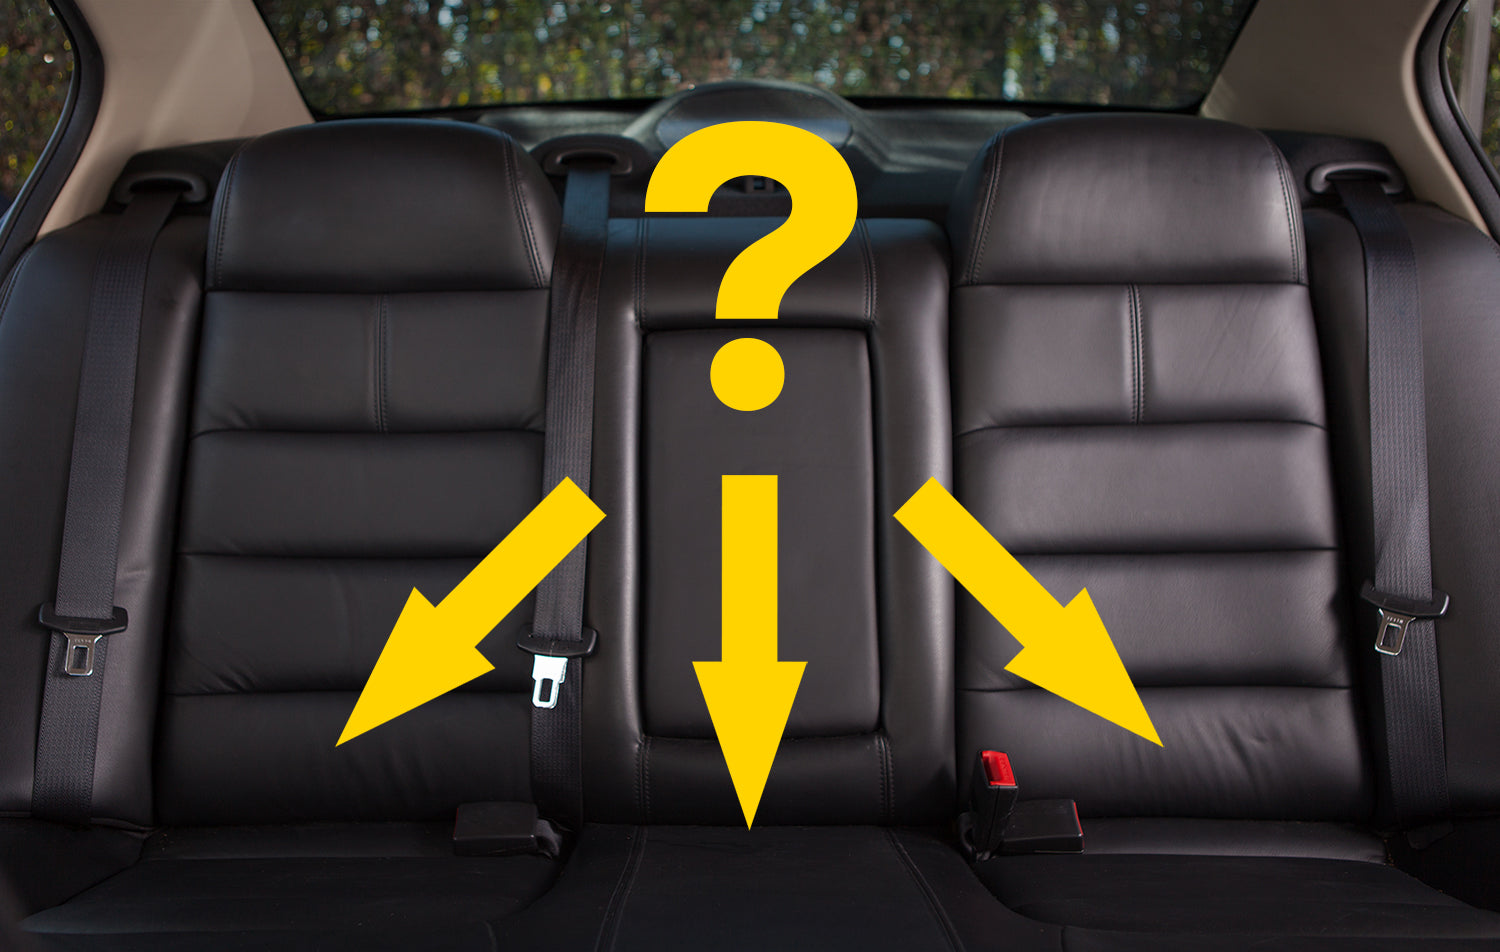 Which is the safest position for a car seat?